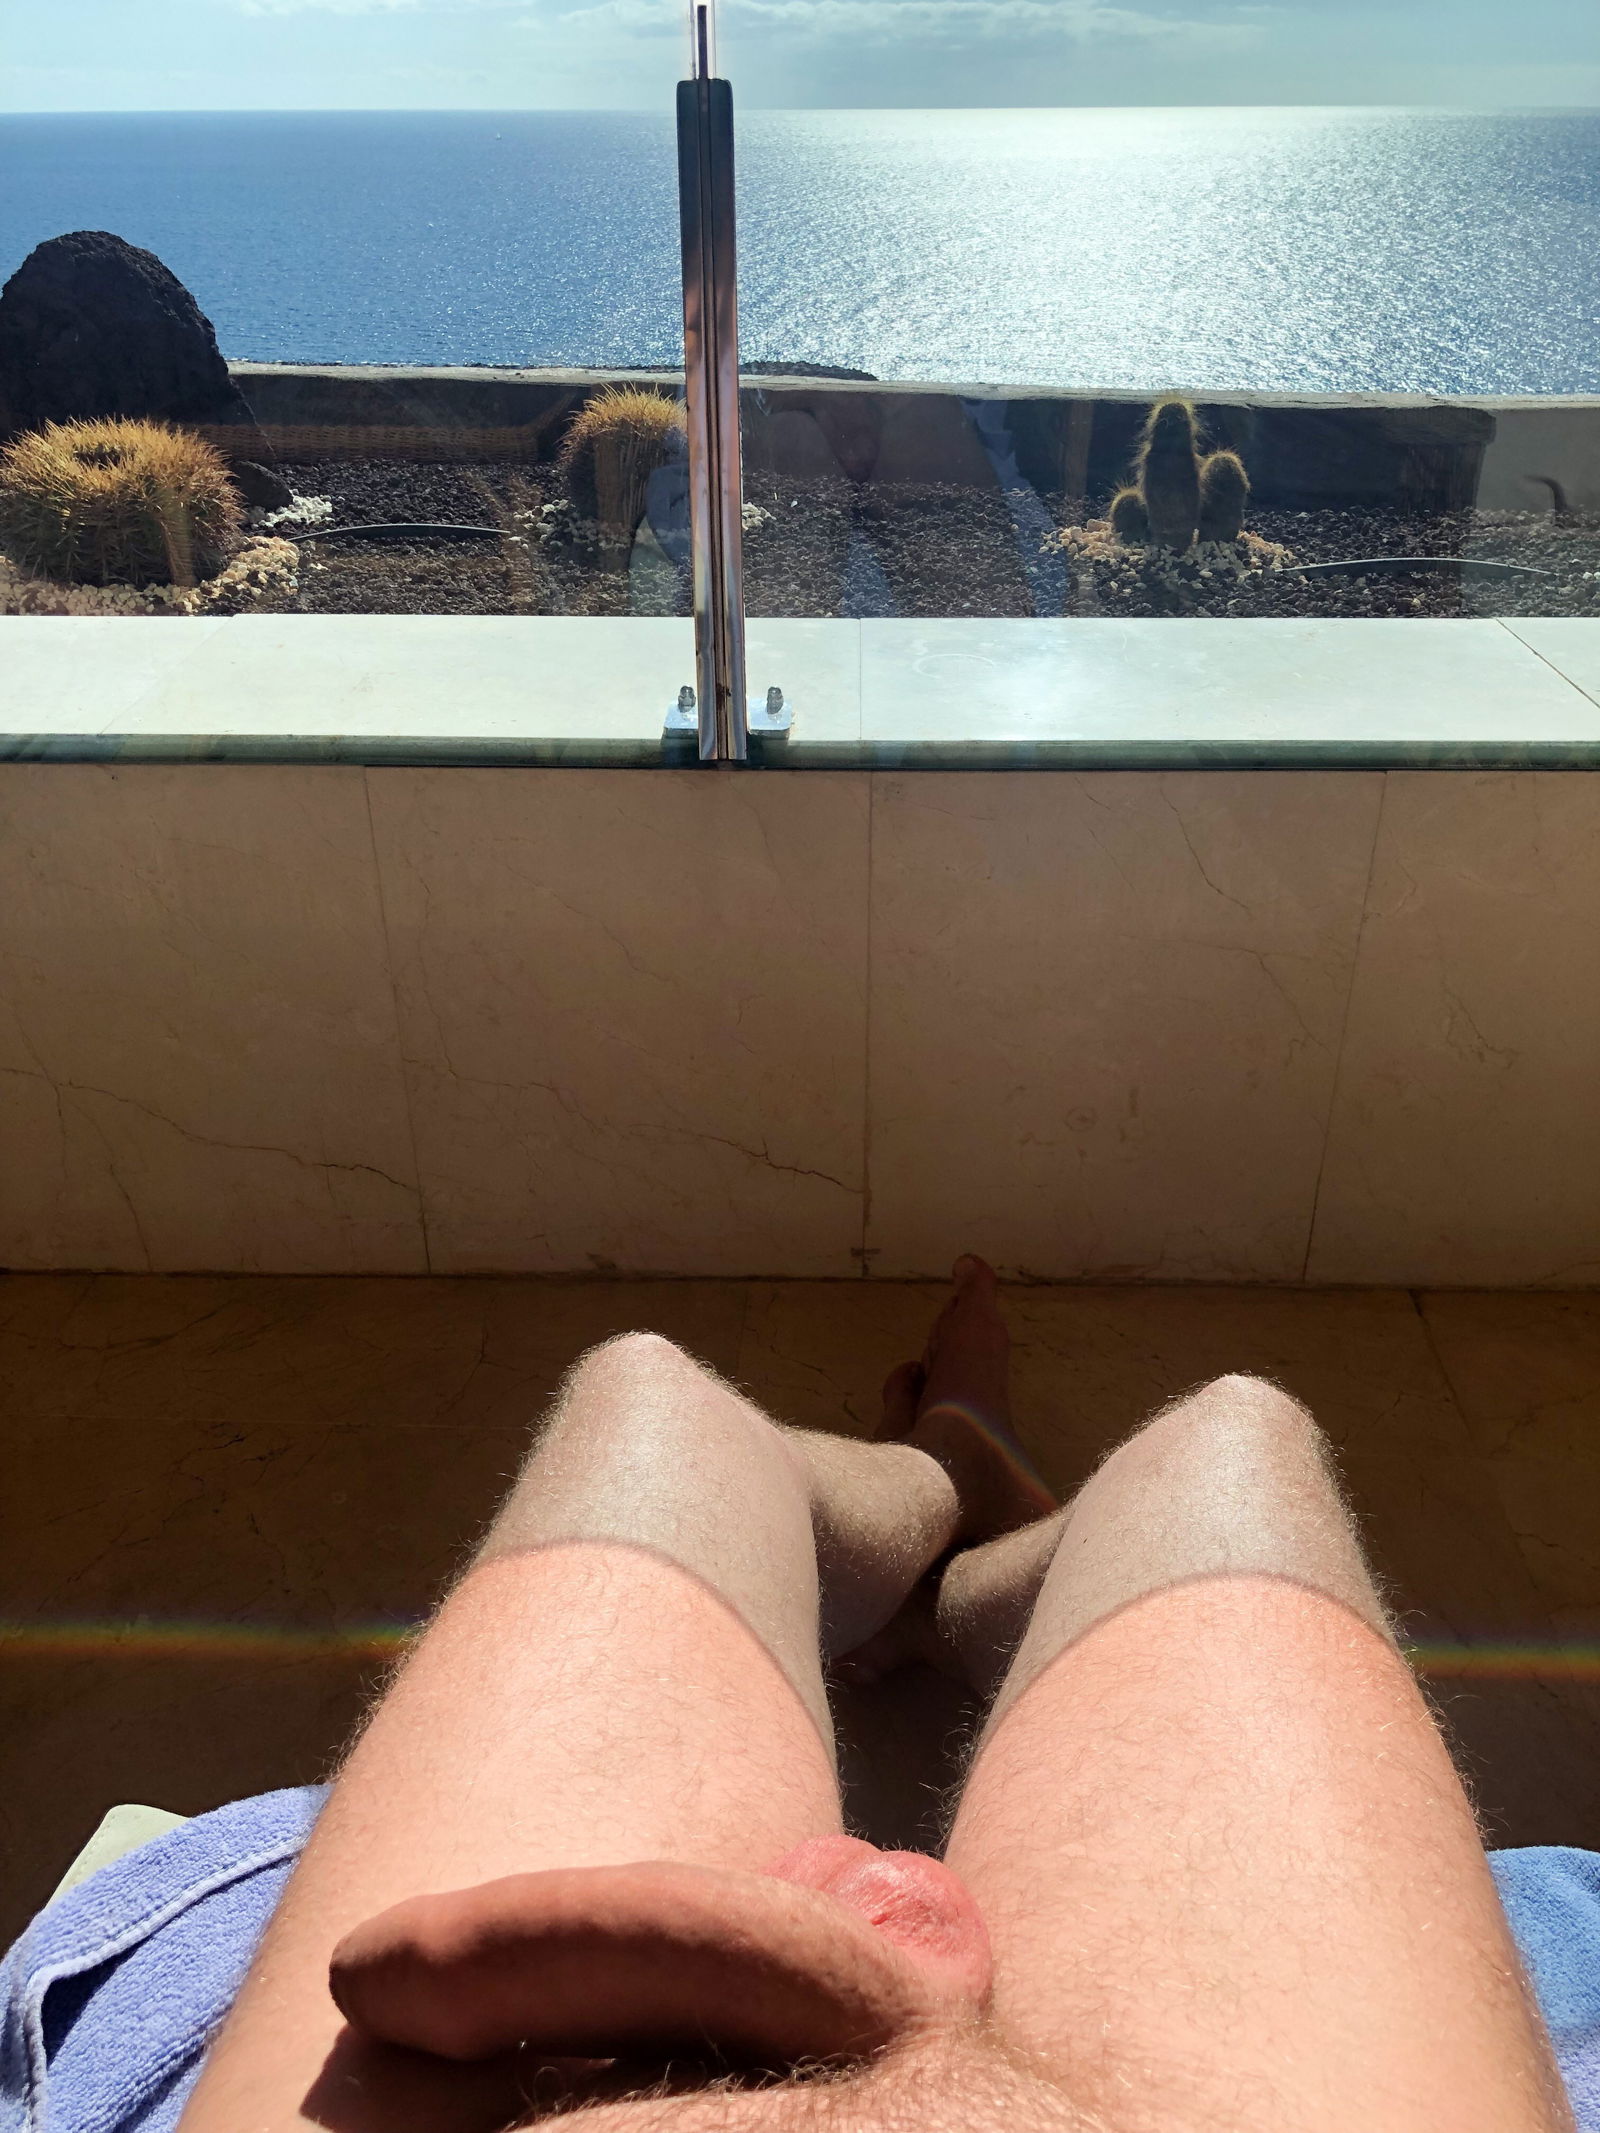 Photo by Bakk with the username @Bakk, who is a verified user,  December 29, 2018 at 11:28 AM. The post is about the topic Dick and the text says 'Enjoing the view..'